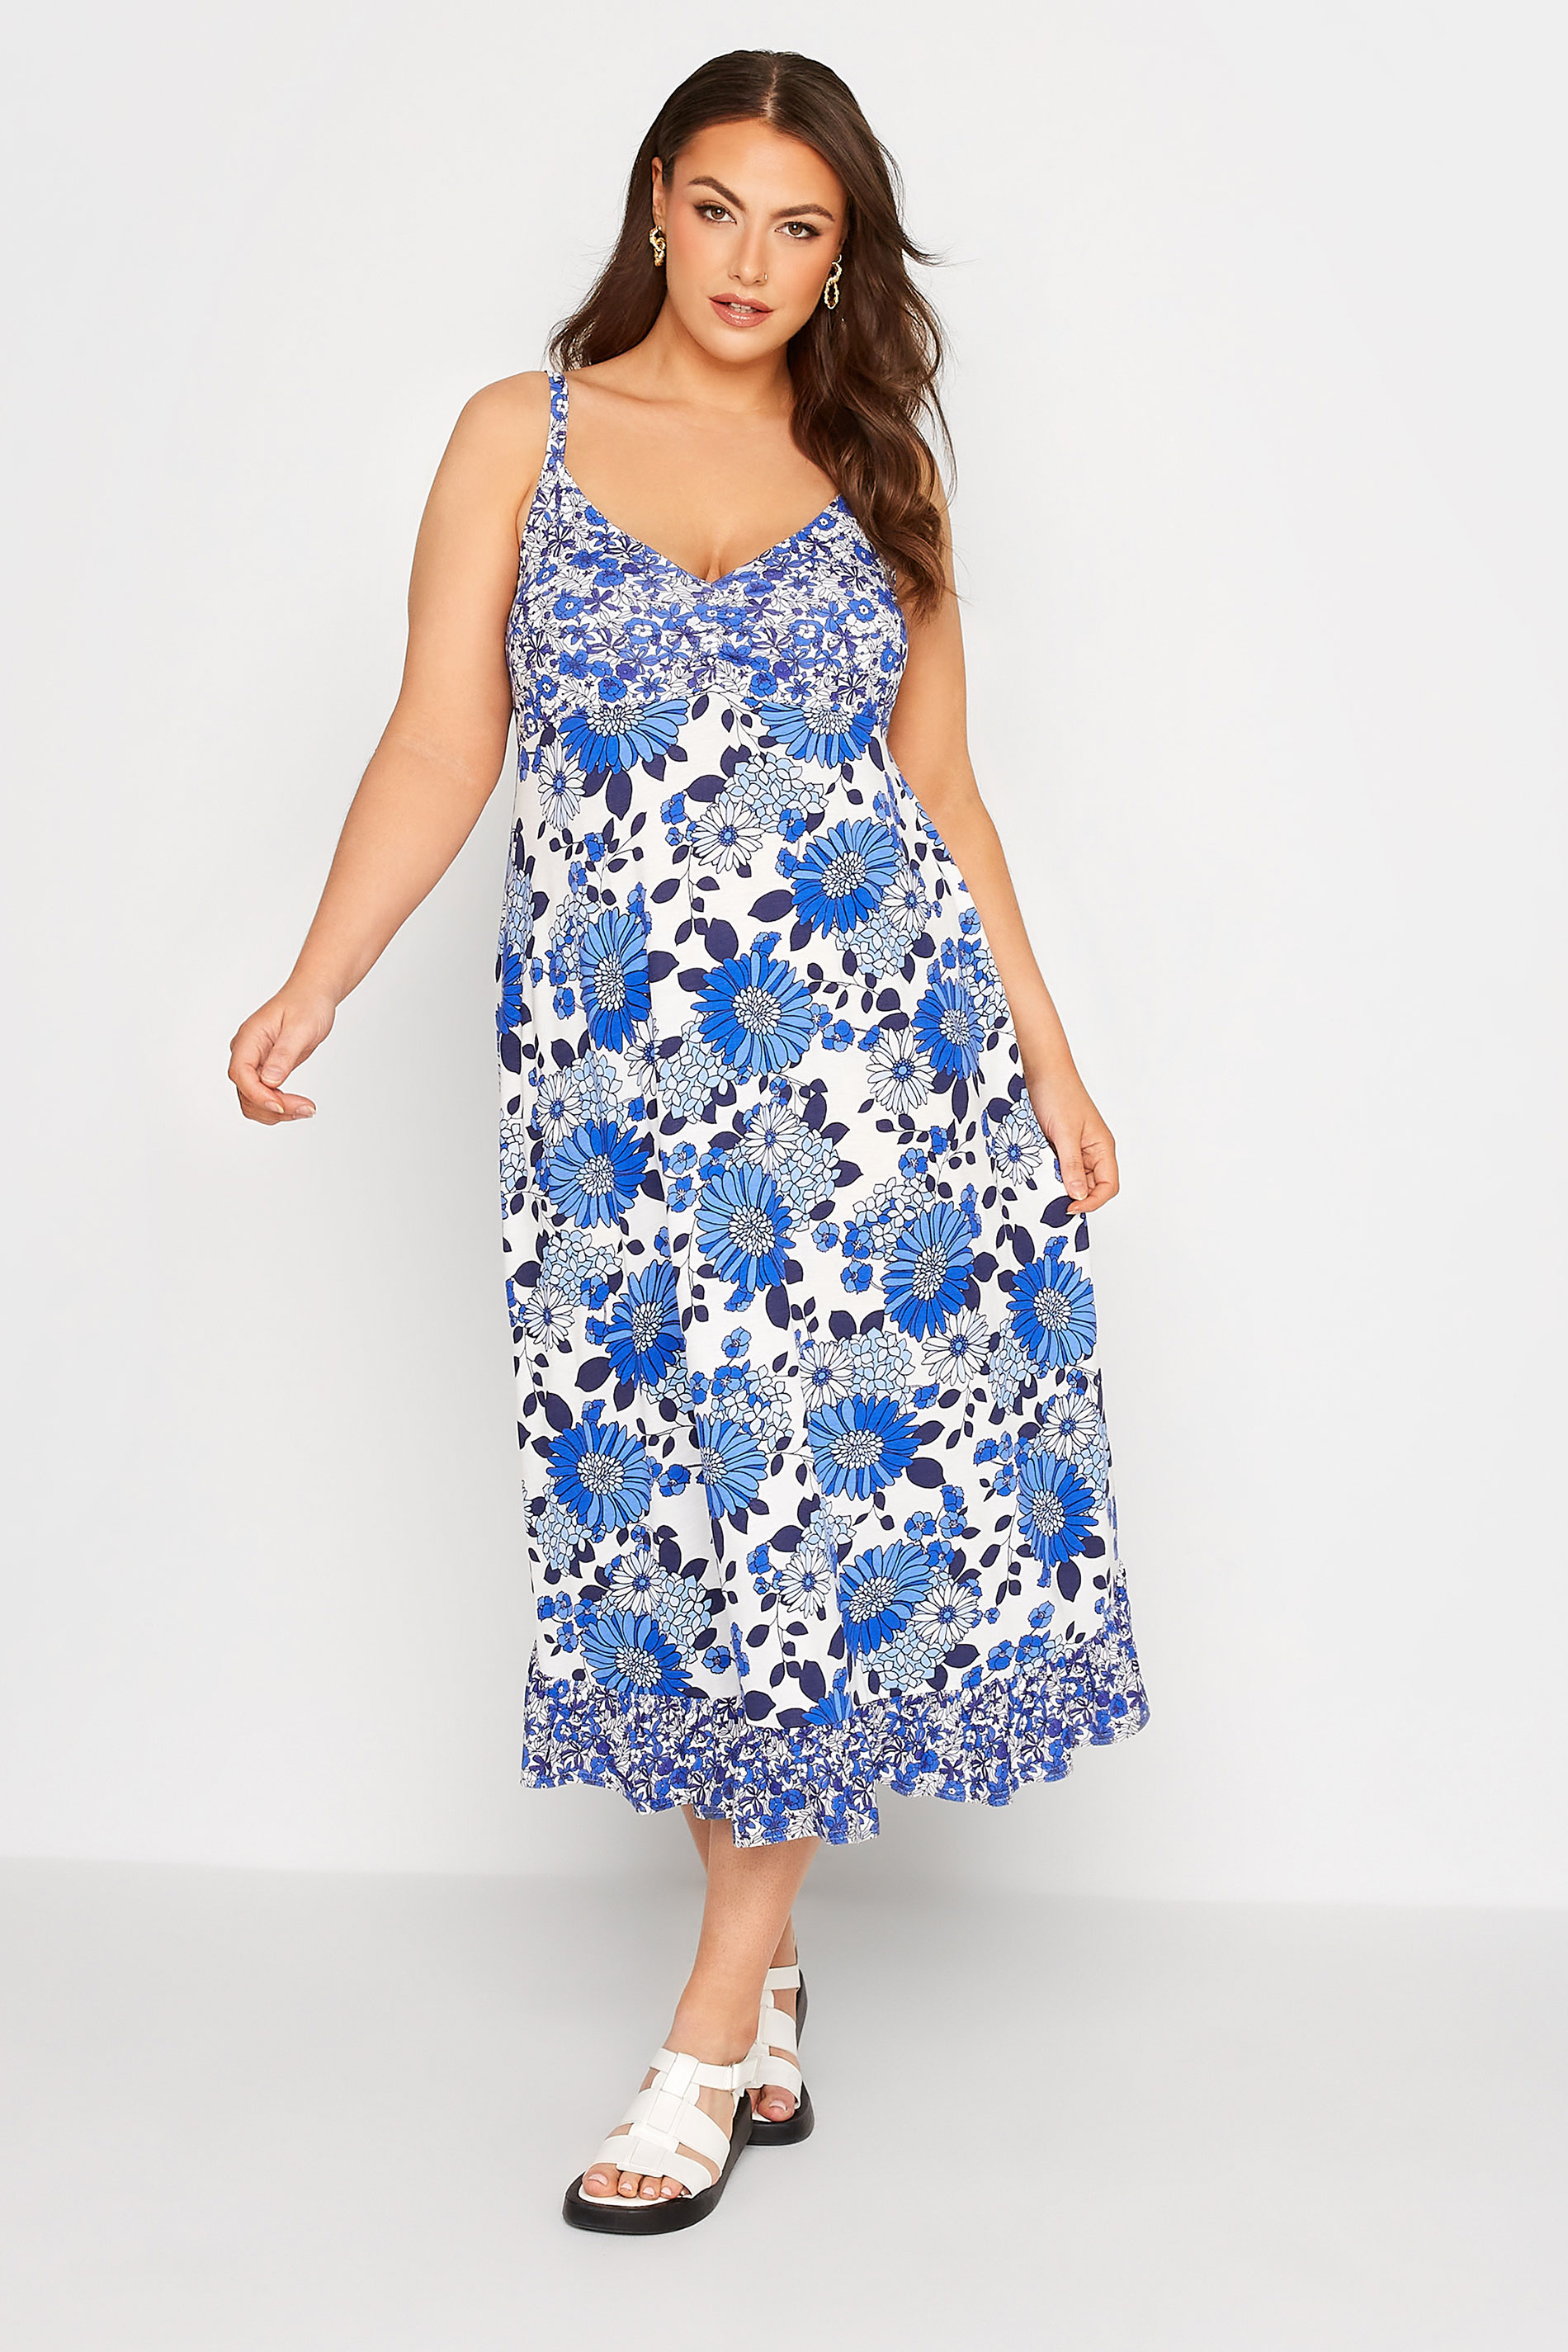 LIMITED COLLECTION Curve Blue Floral Print Frill Midaxi Sundress 1